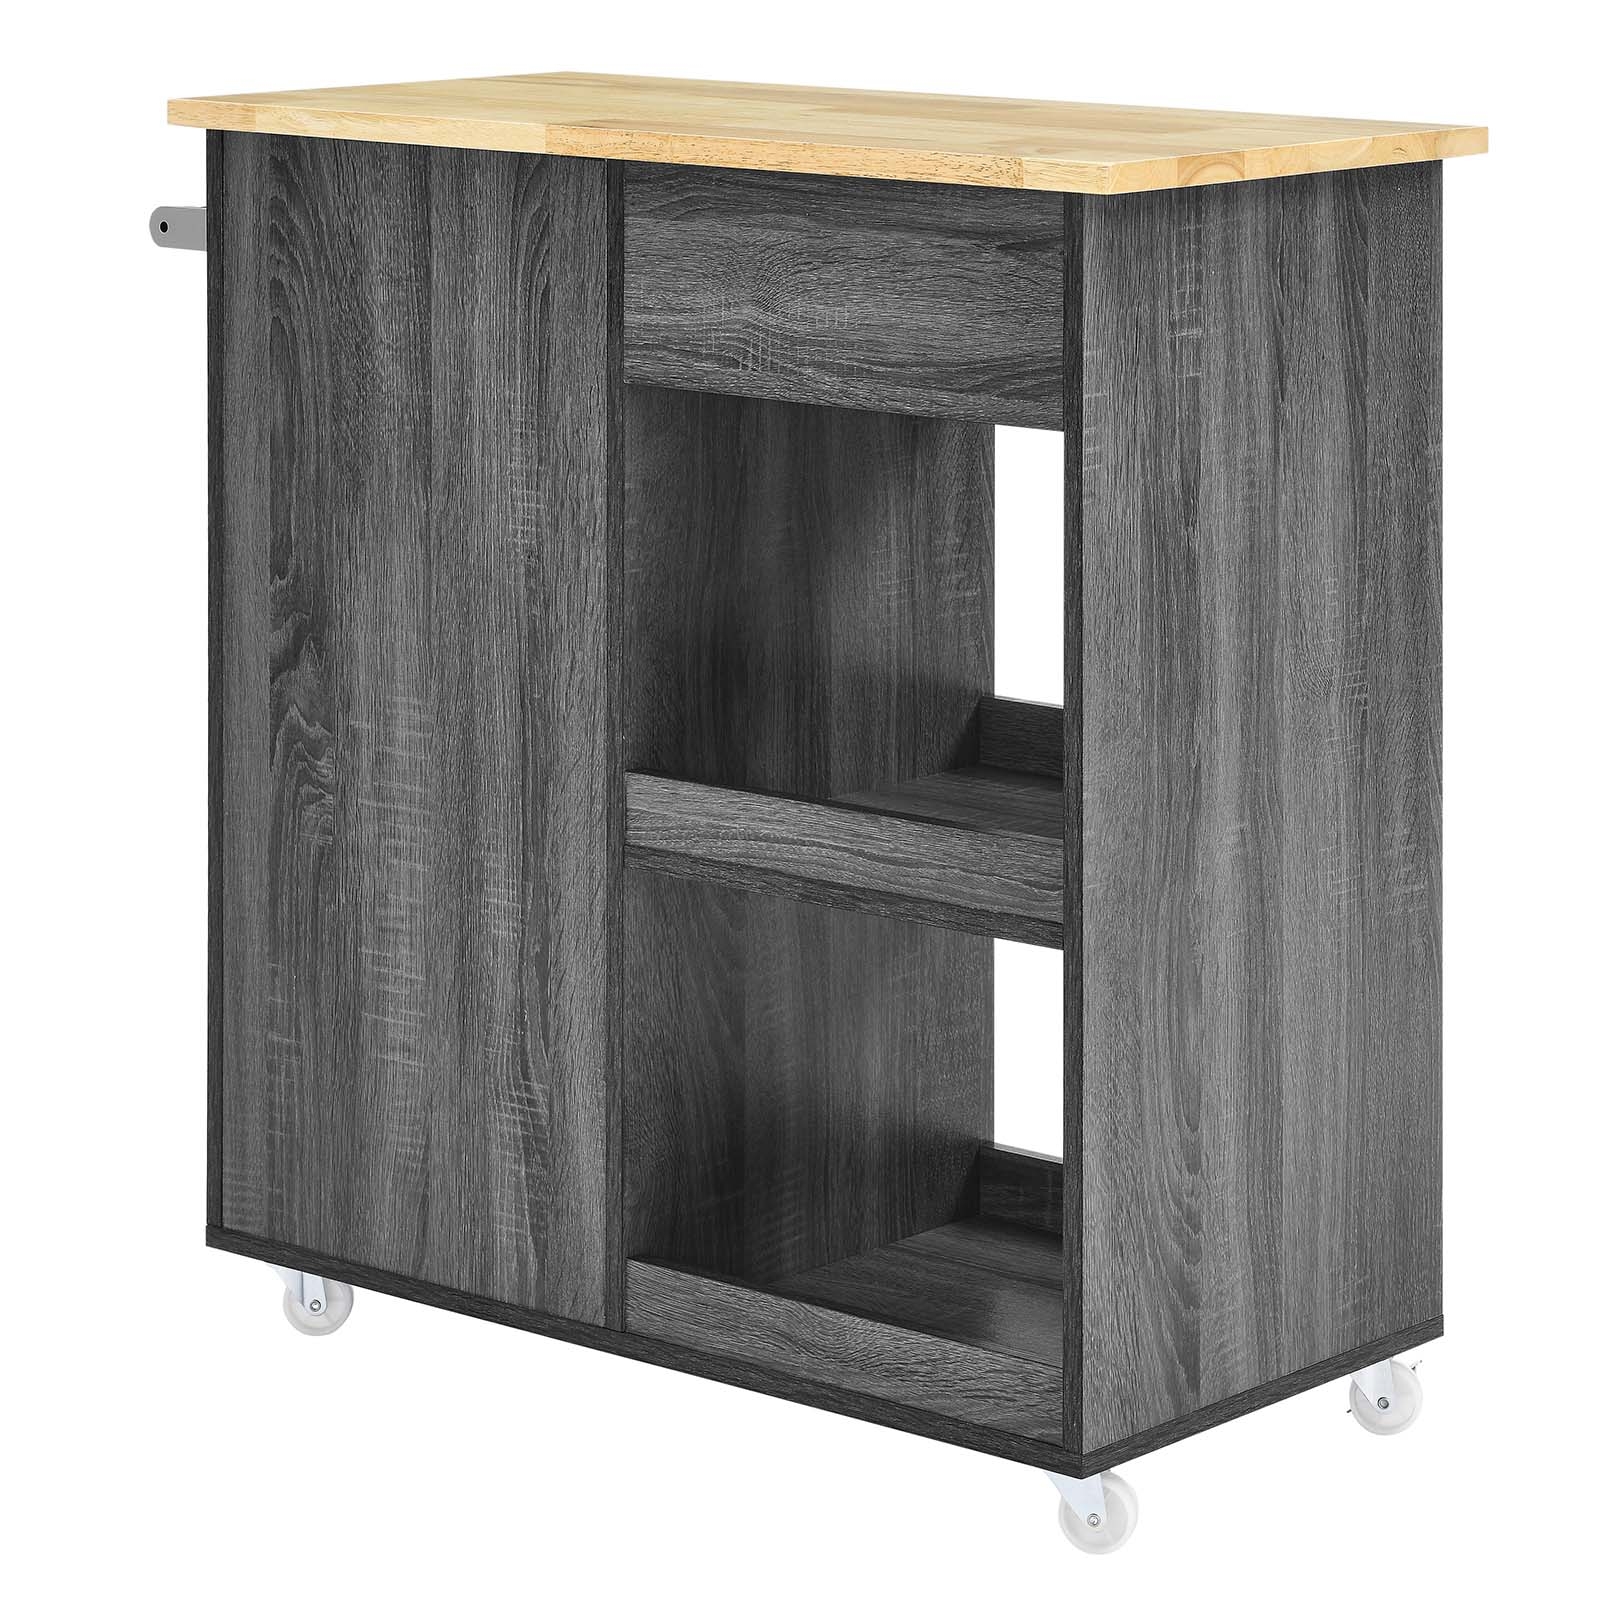 Culinary Kitchen Cart With Towel Bar, Charcoal Natural